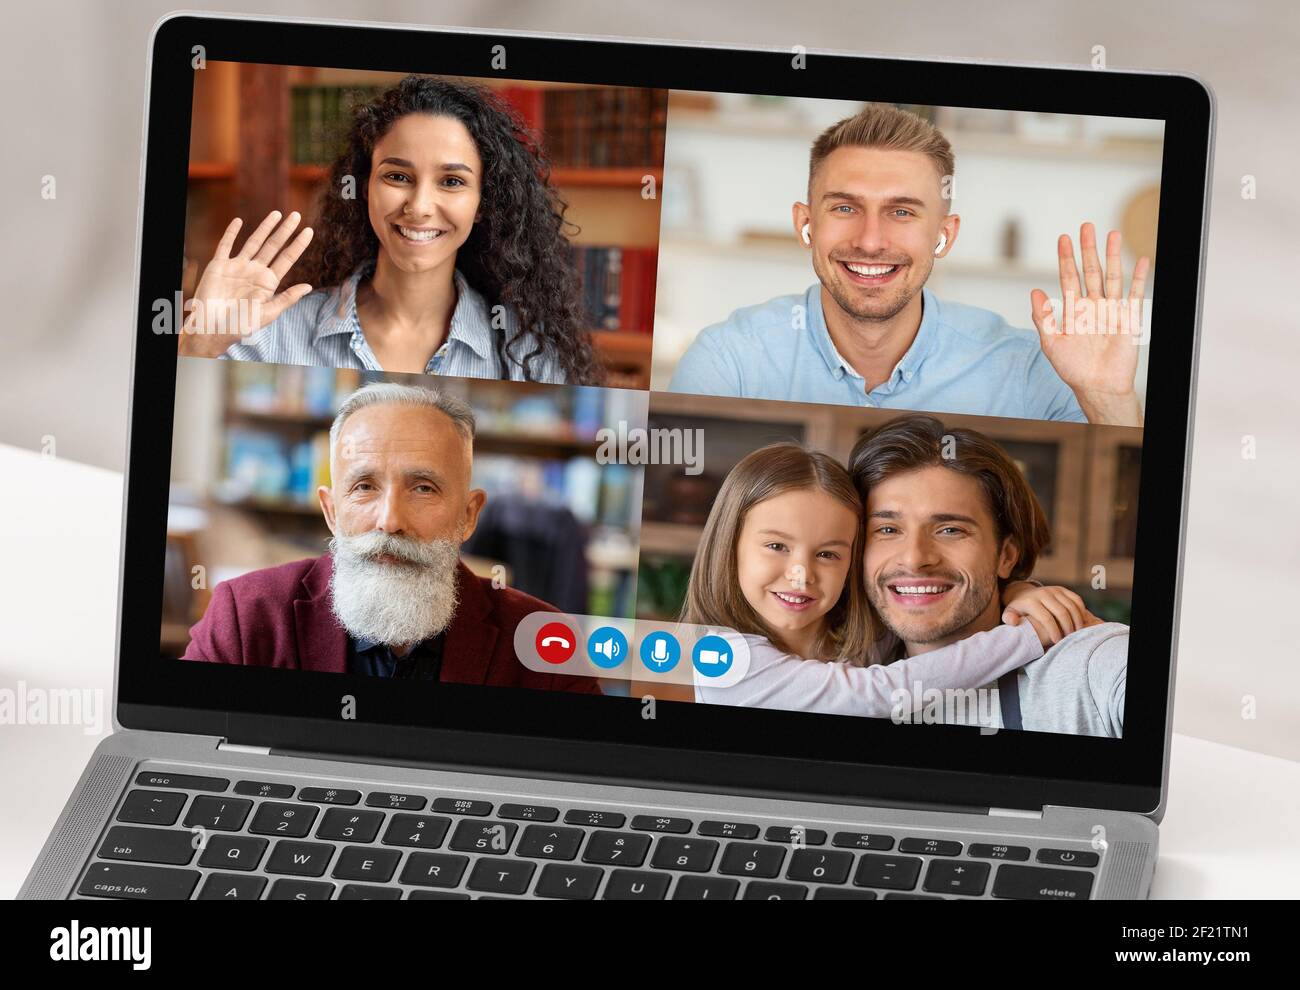 Family online conference, video call, congratulations on holiday and human positive emotion during covid-19 lockdown Stock Photo